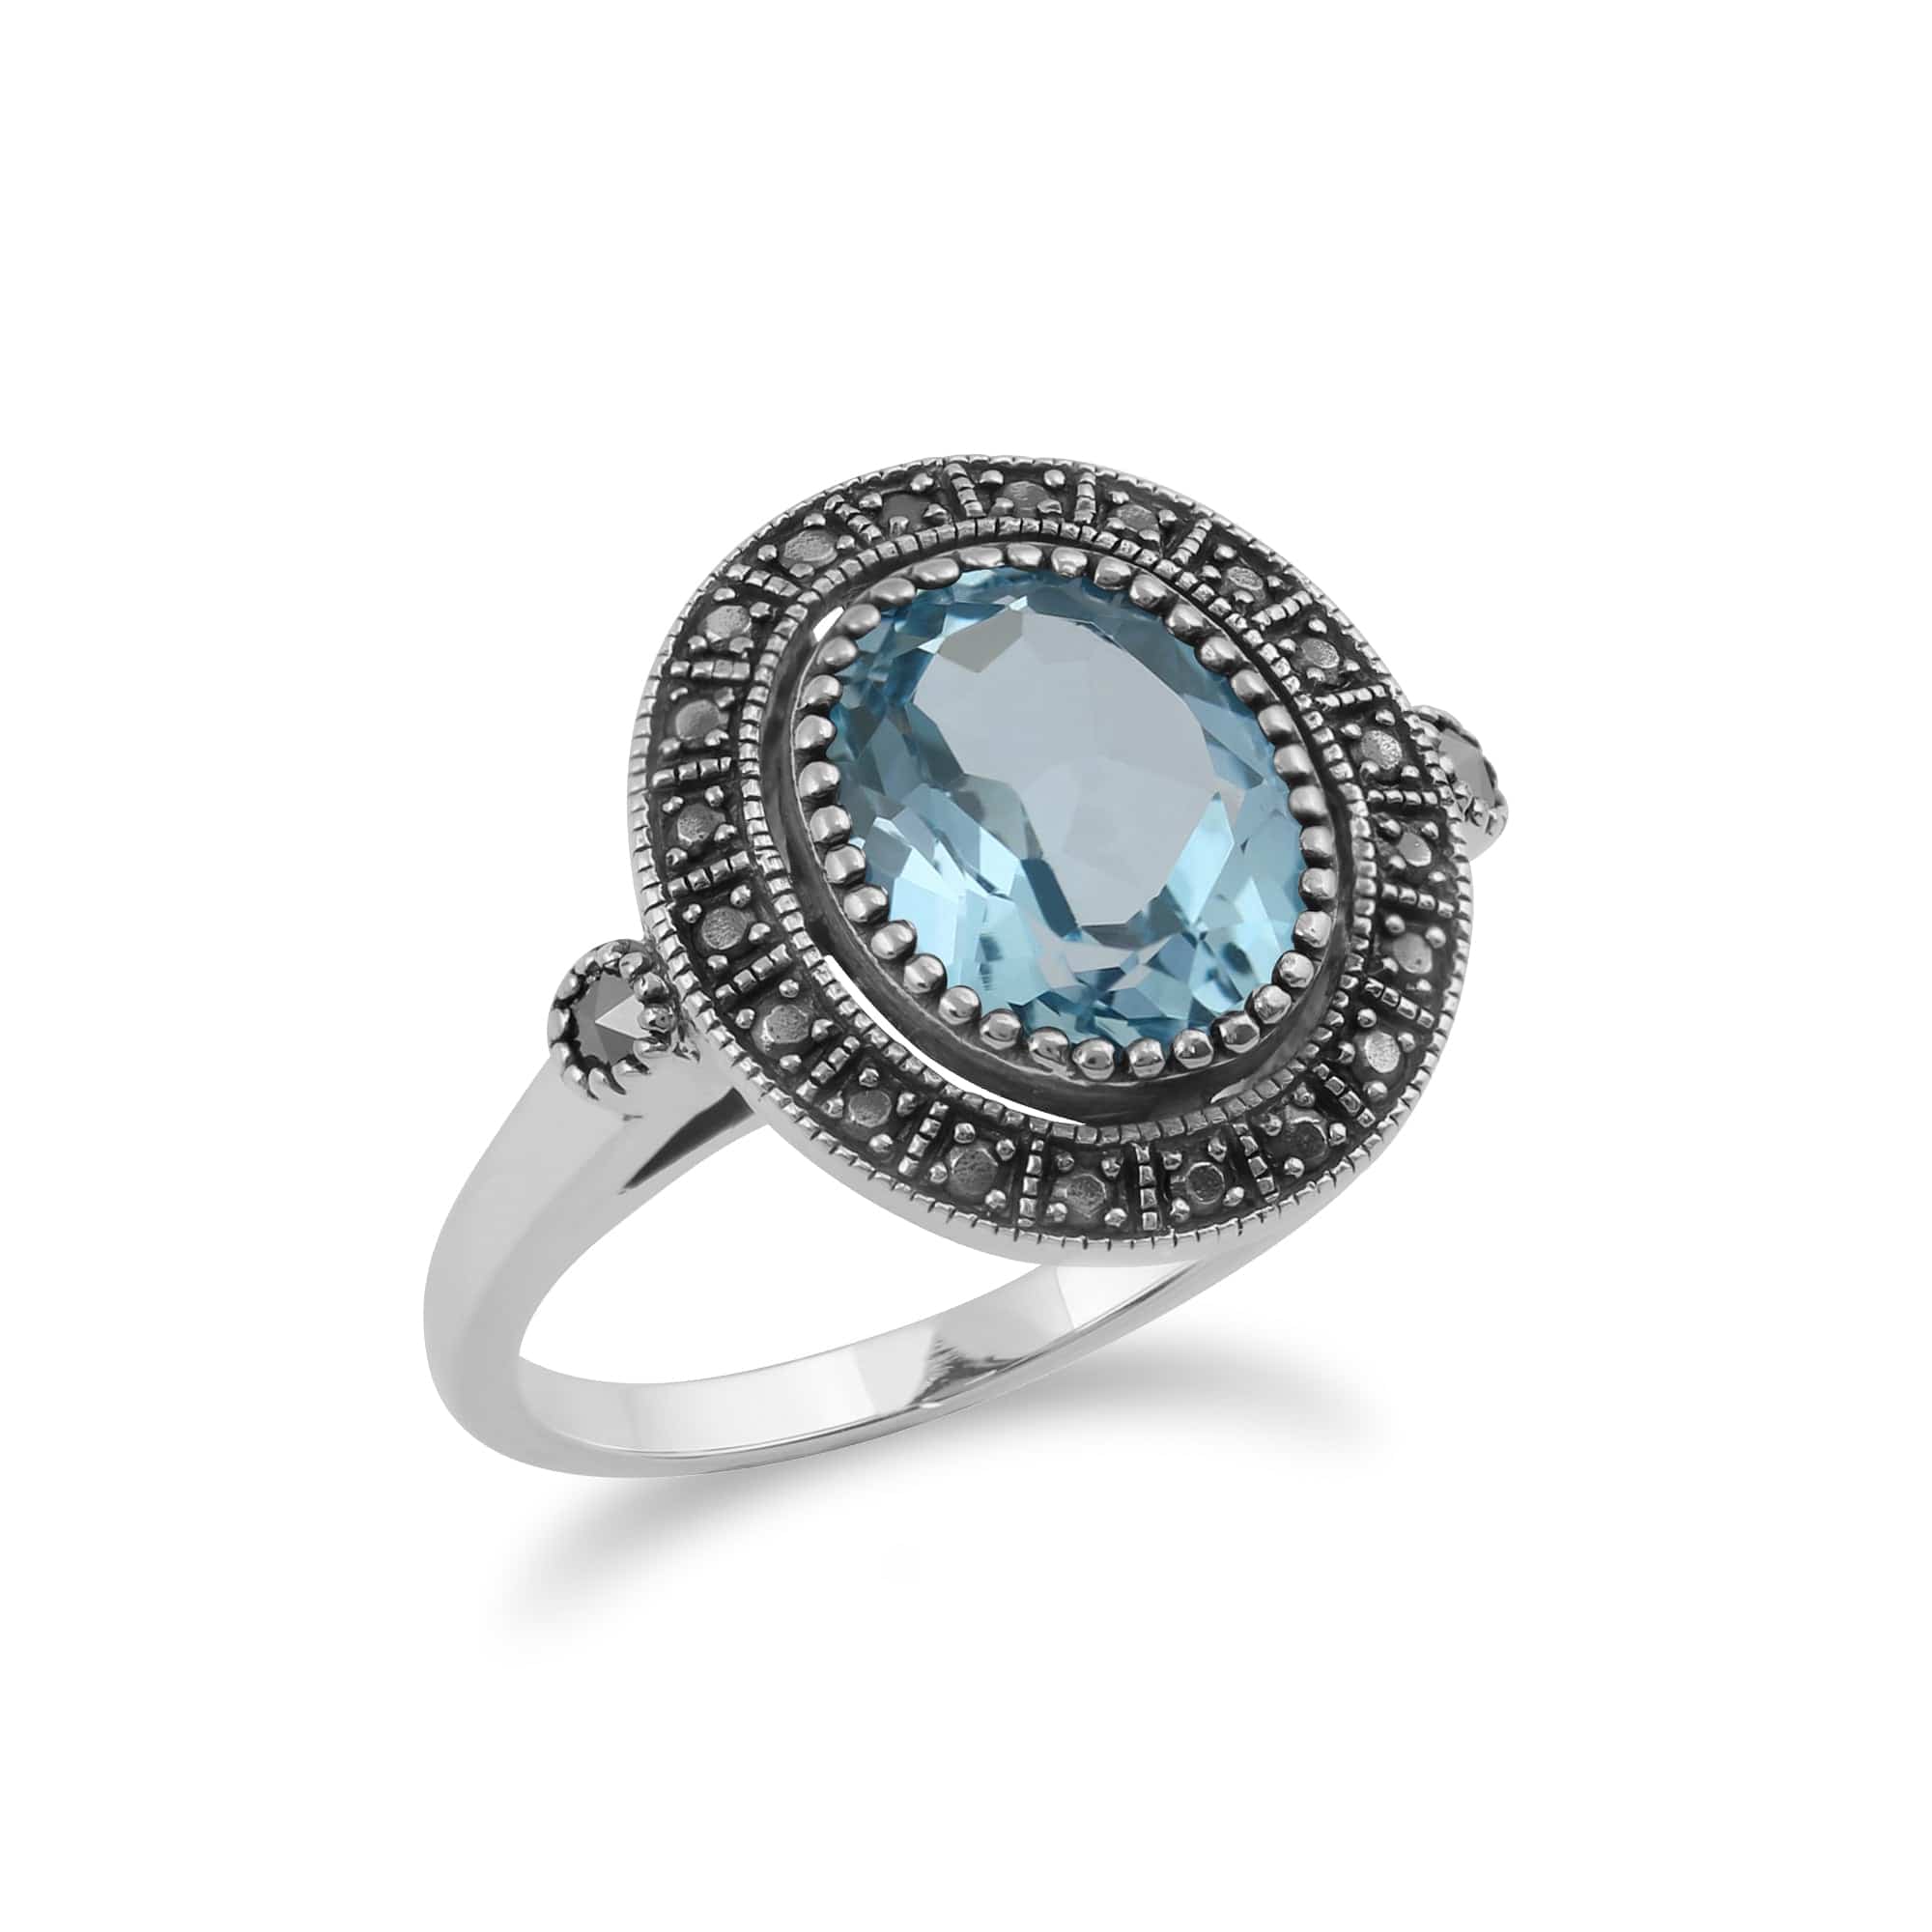 224R029505925 Art Deco Style Oval Blue Topaz & Marcasite Statement Cocktail Ring In Sterling Silver 3